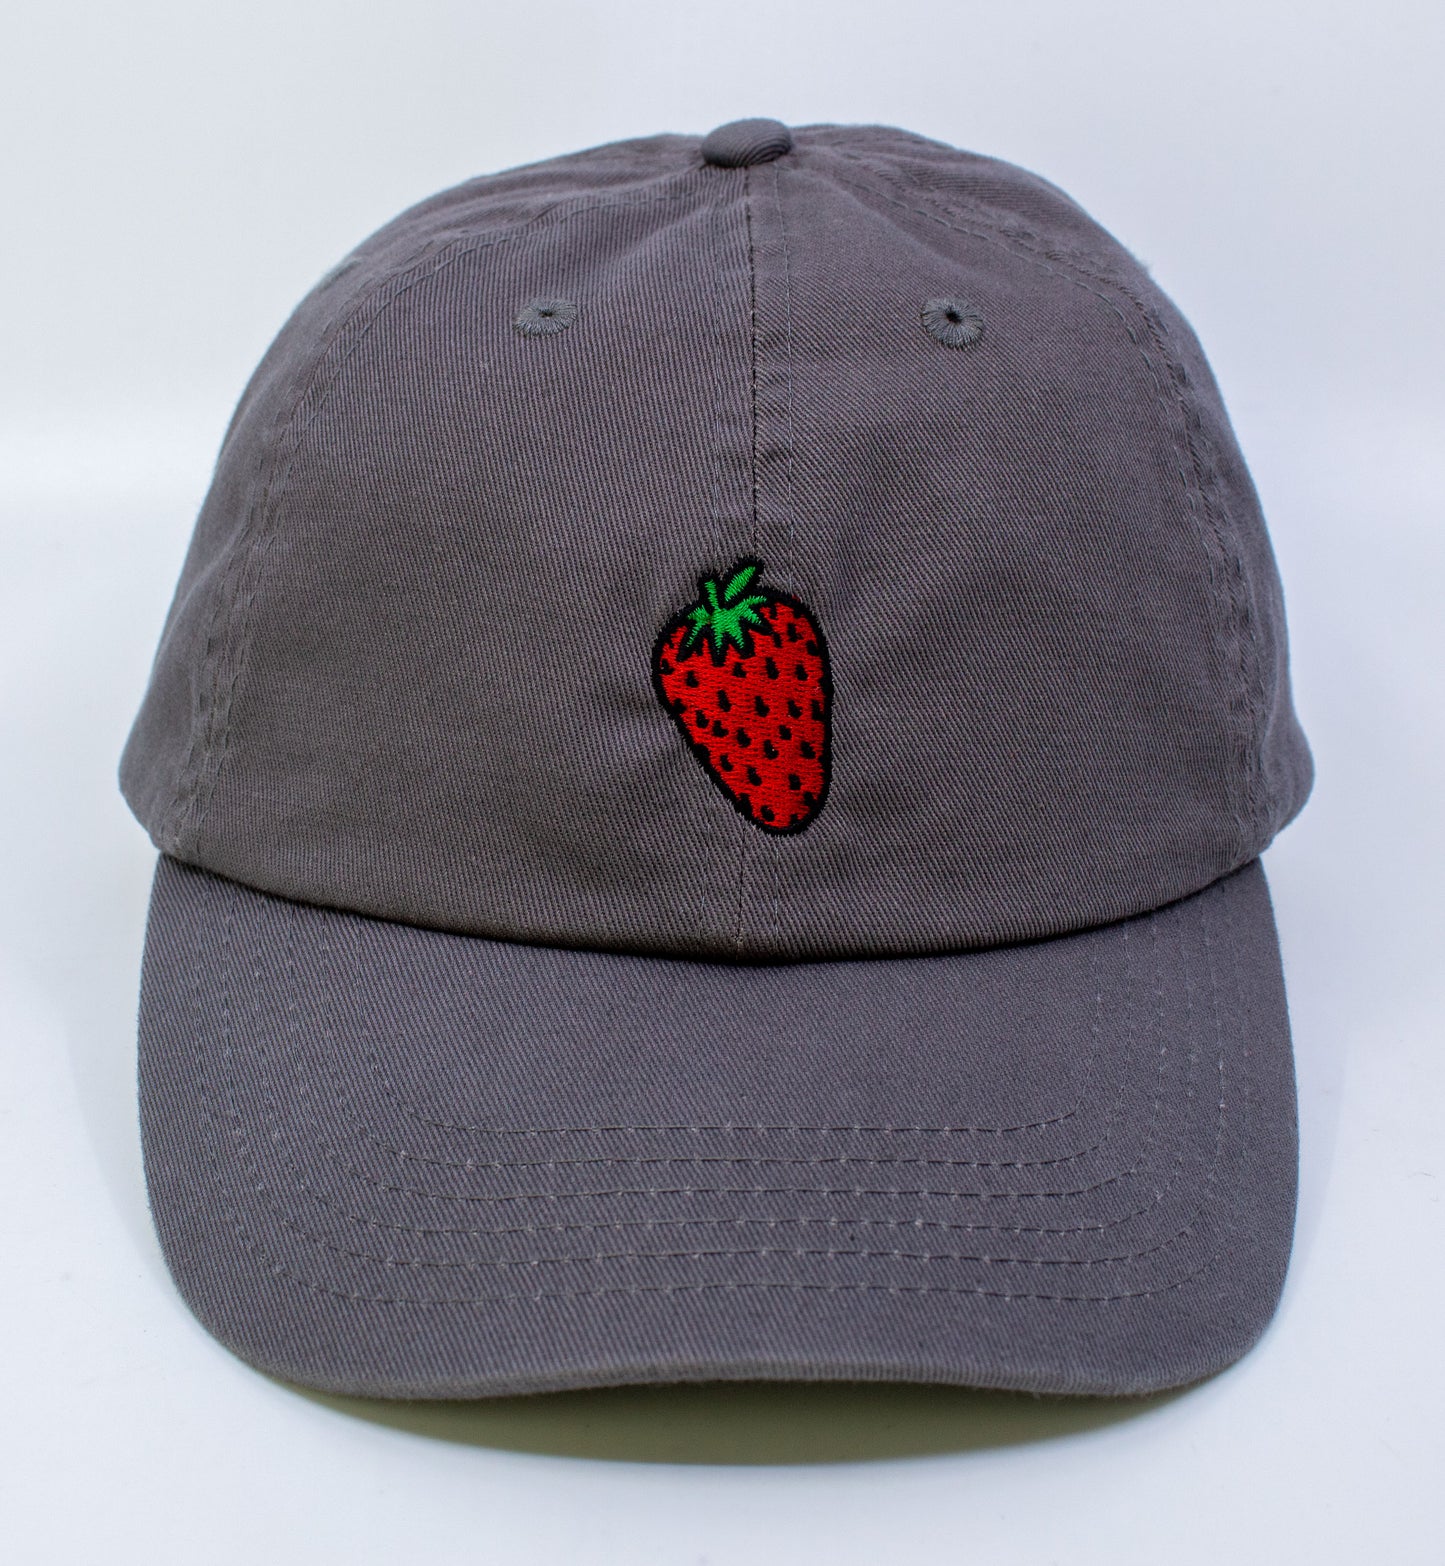 Standard Goods Strawberry Dad Hat - Grey/Charcoal